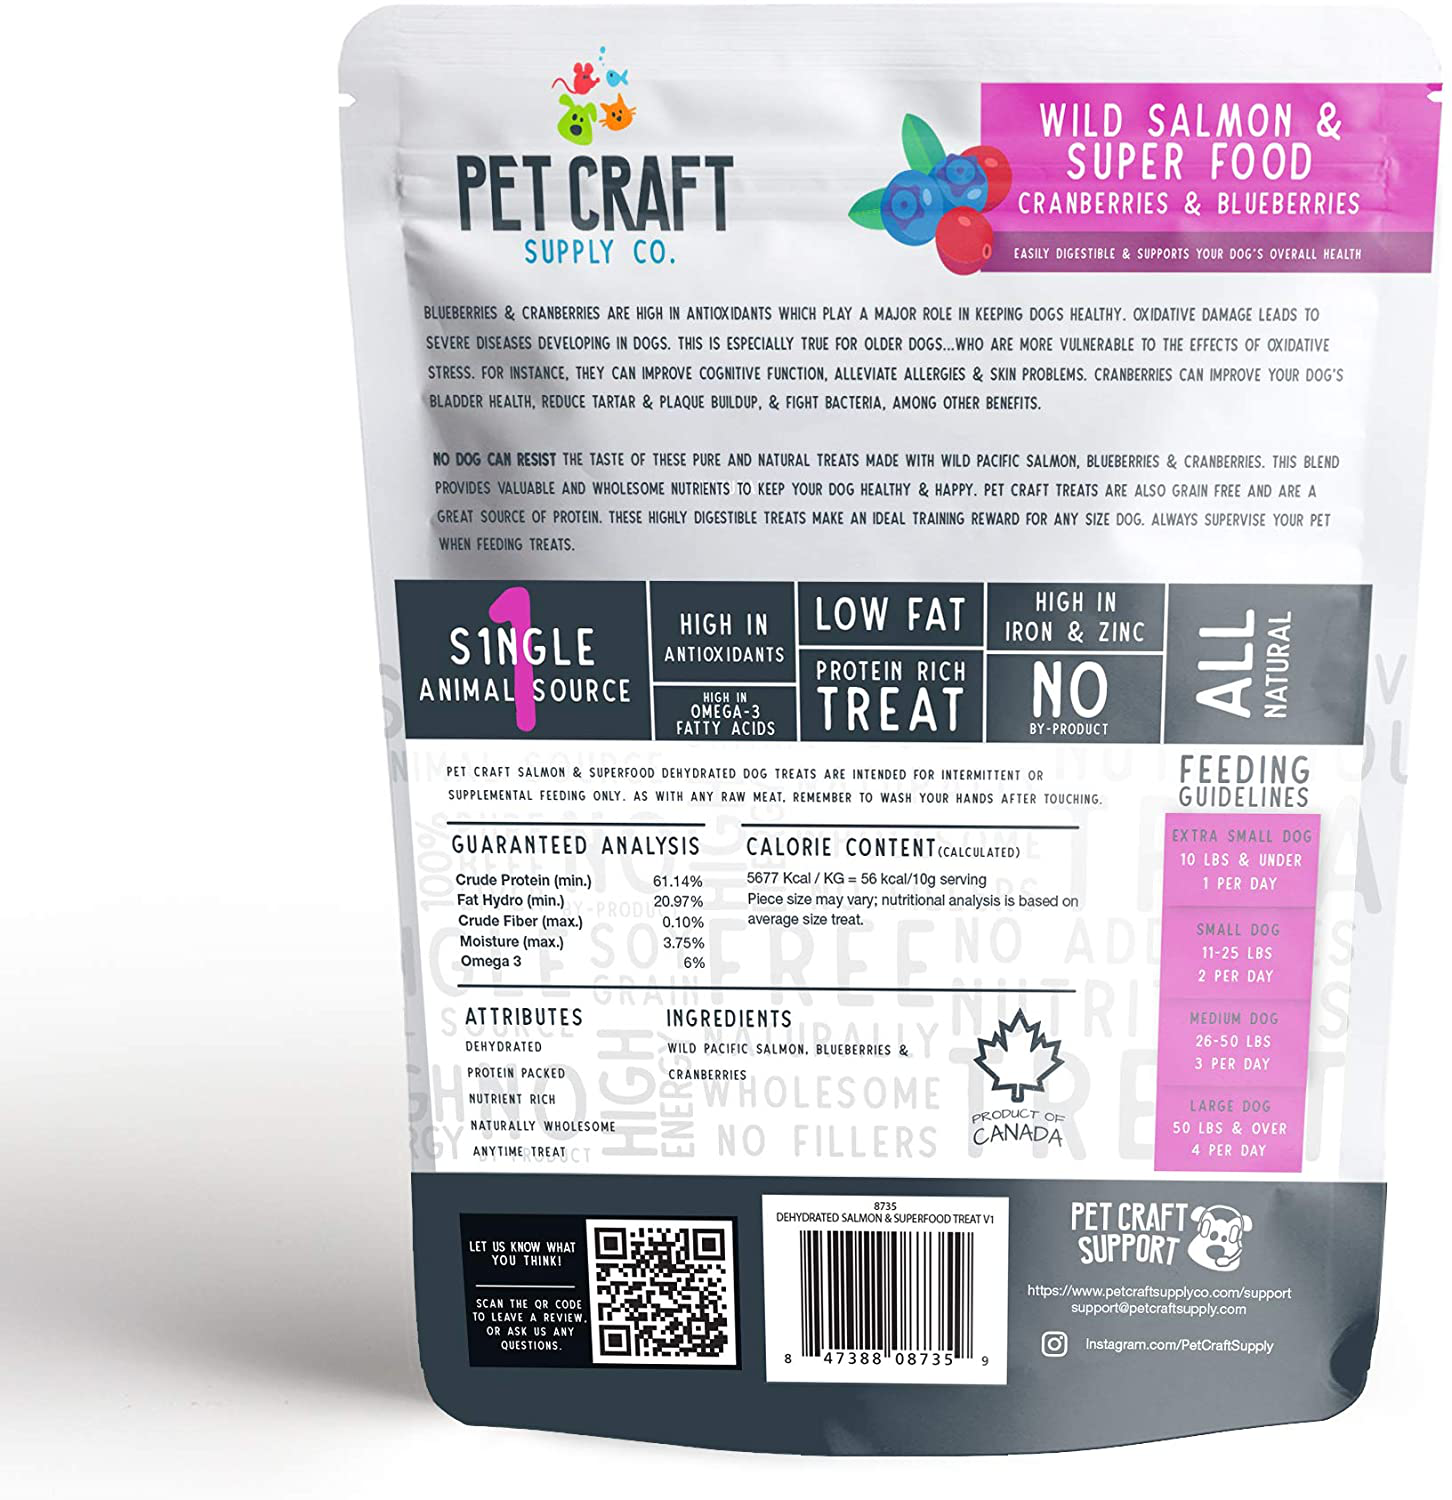 Pet Craft Supply Pure Natural Dried Dog Treats - Salmon Dog Treats - Liver Treats - Training Treats Great for Puppies - Grain Free